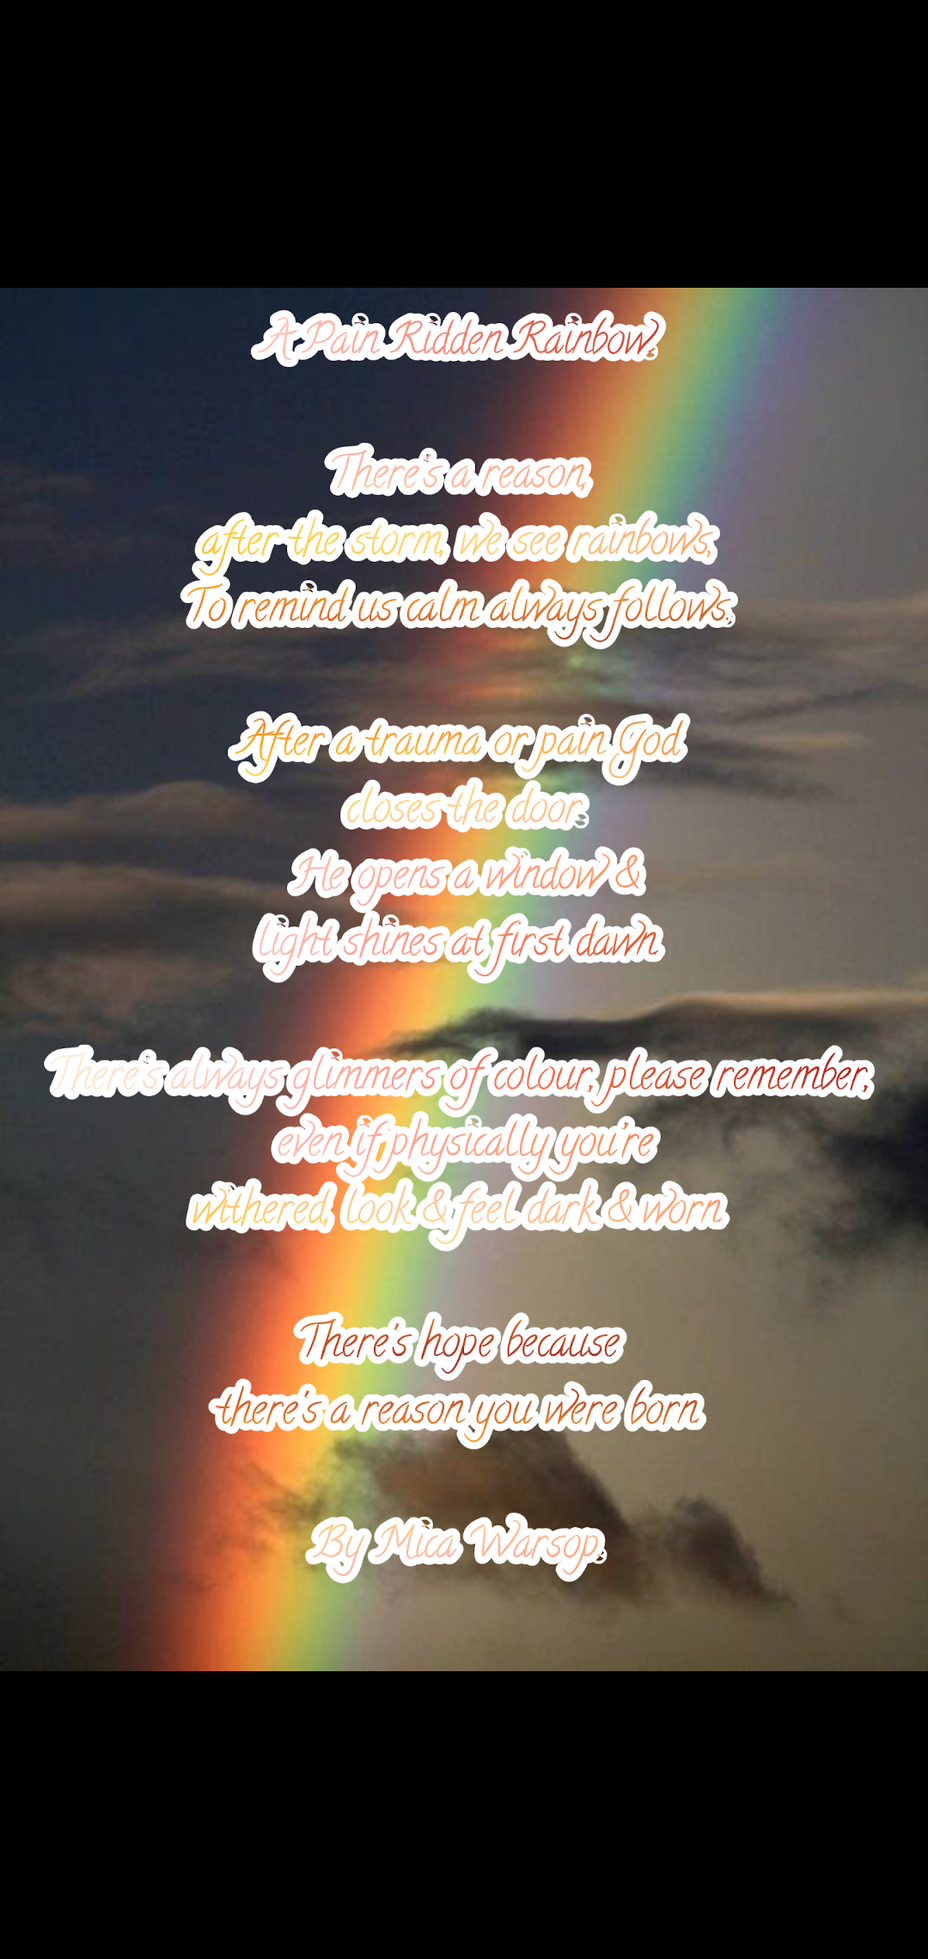 <p>A poem called Pain Ridden Rainbow by Mica Warsop</p>